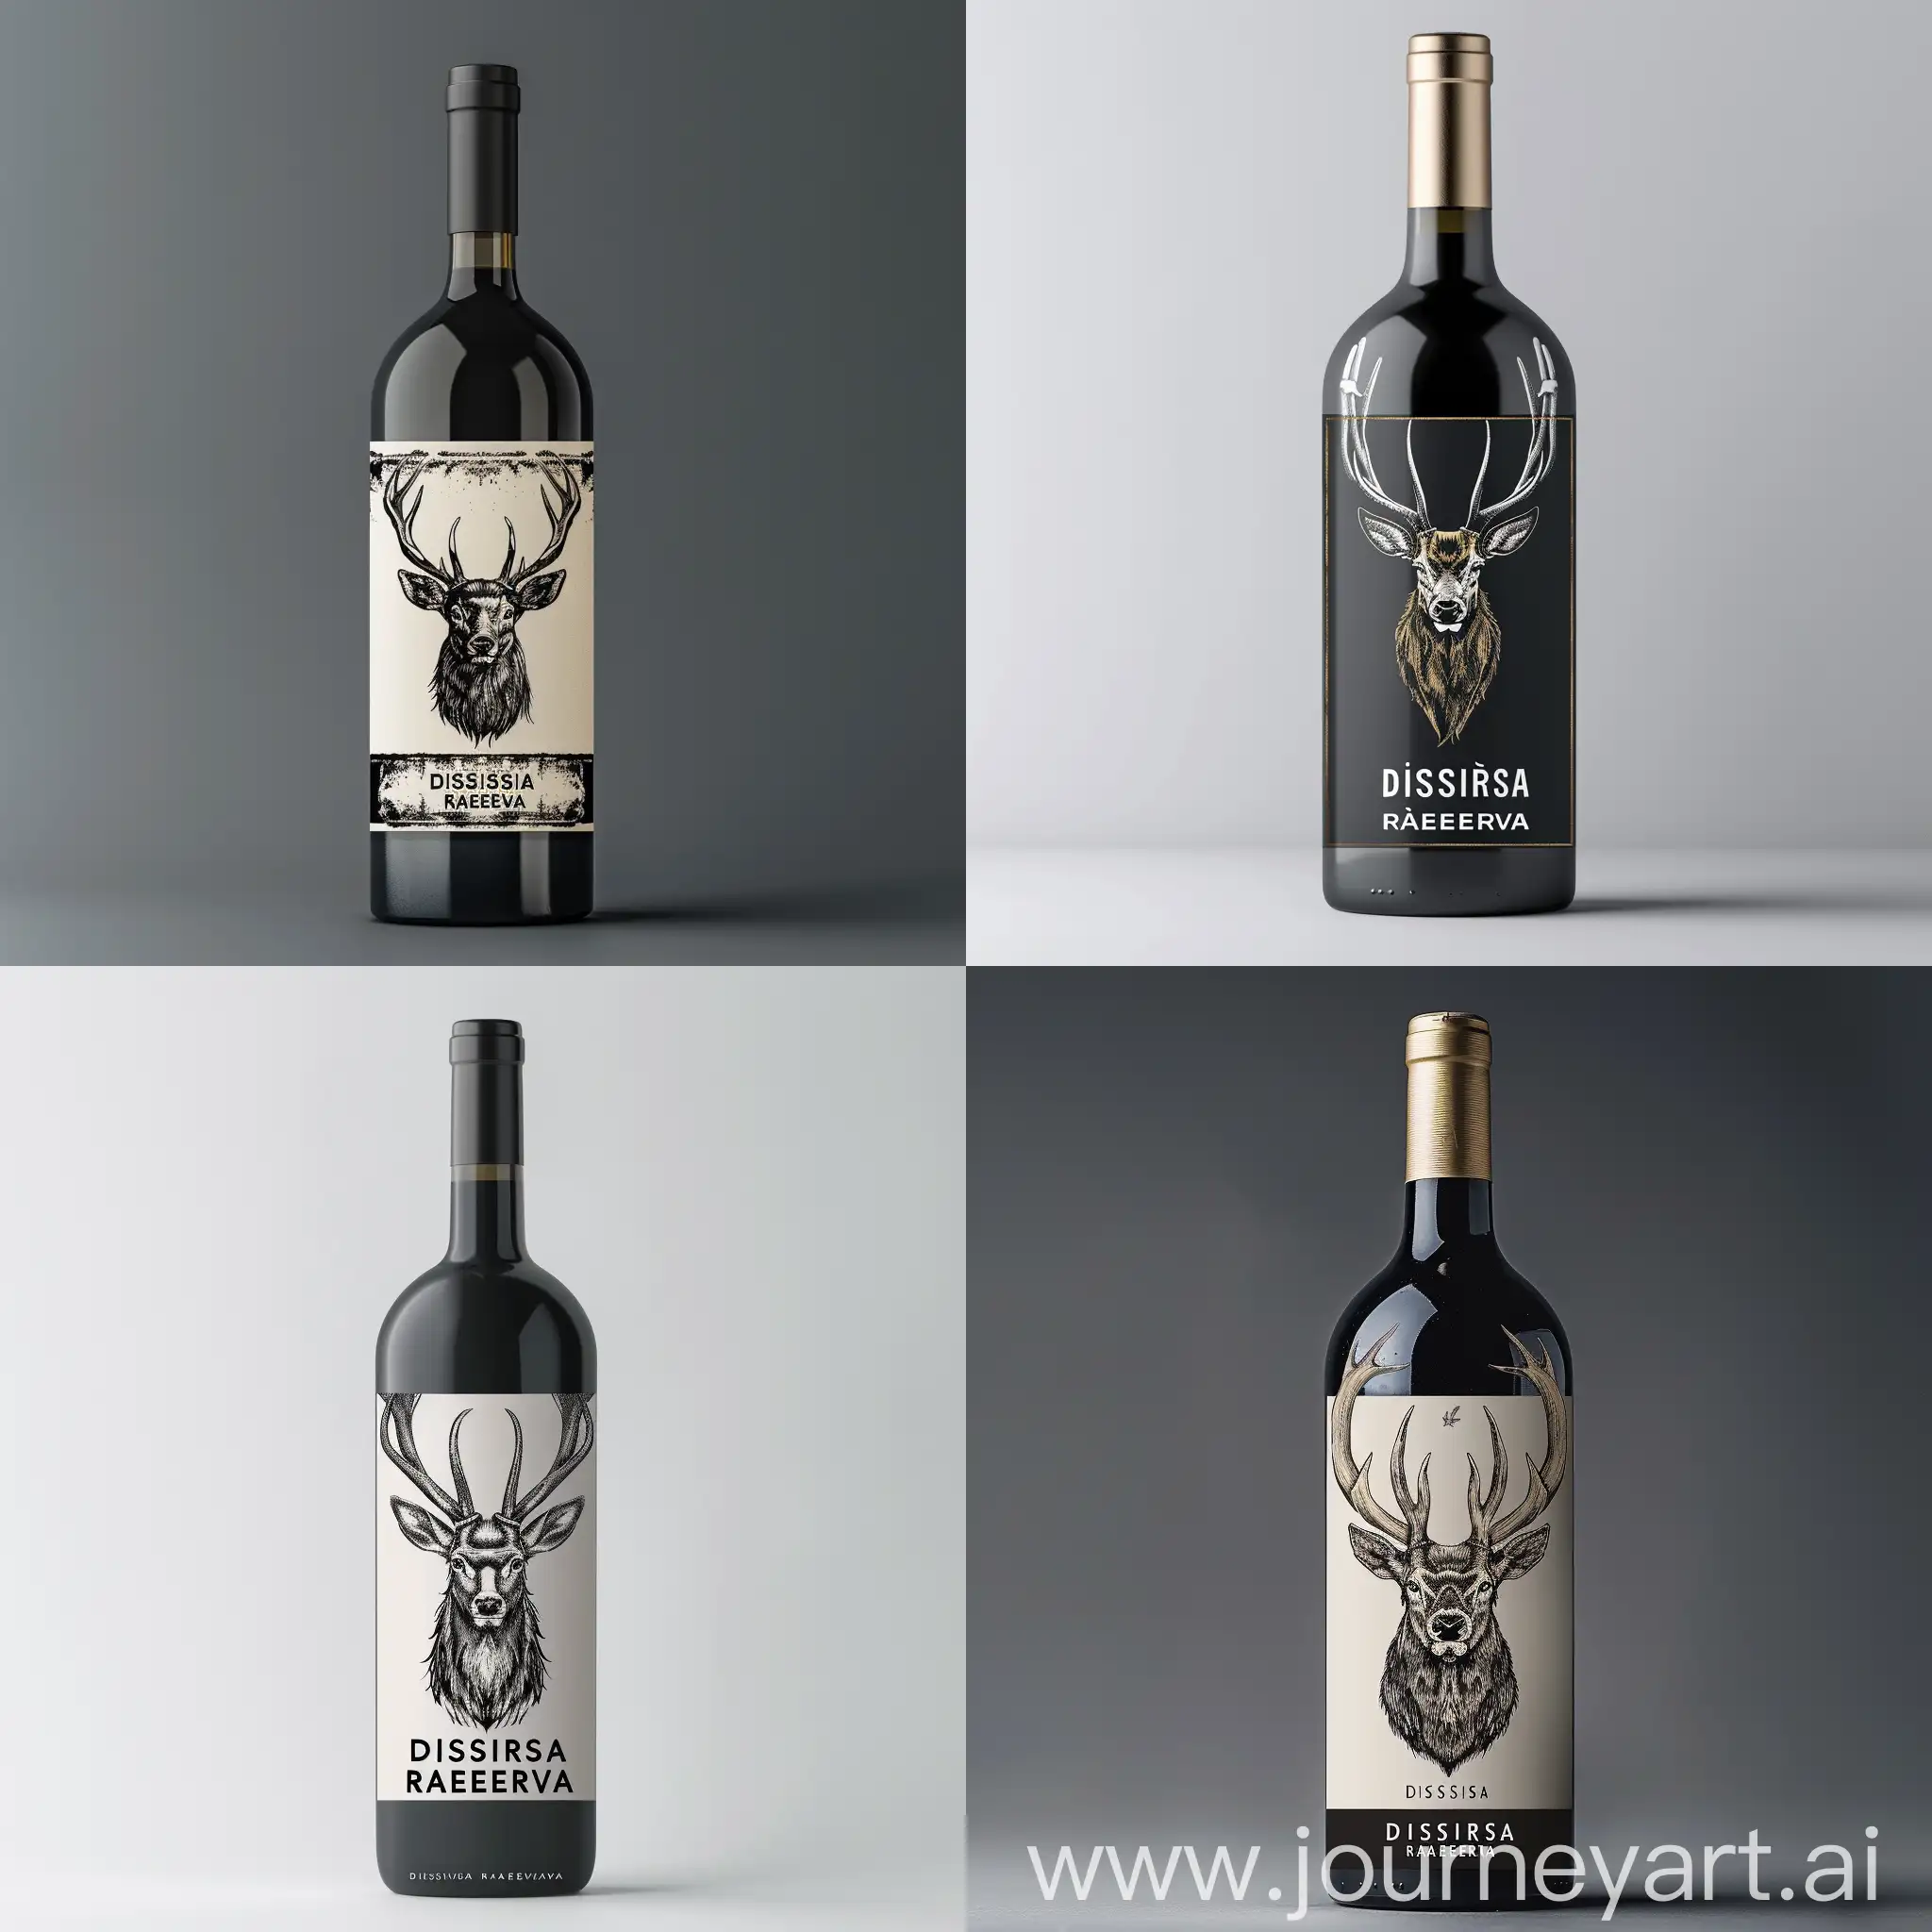 A wine bottle label, featuring a majestic stag's head, with the name "Dissiris Raeserva" underneath.